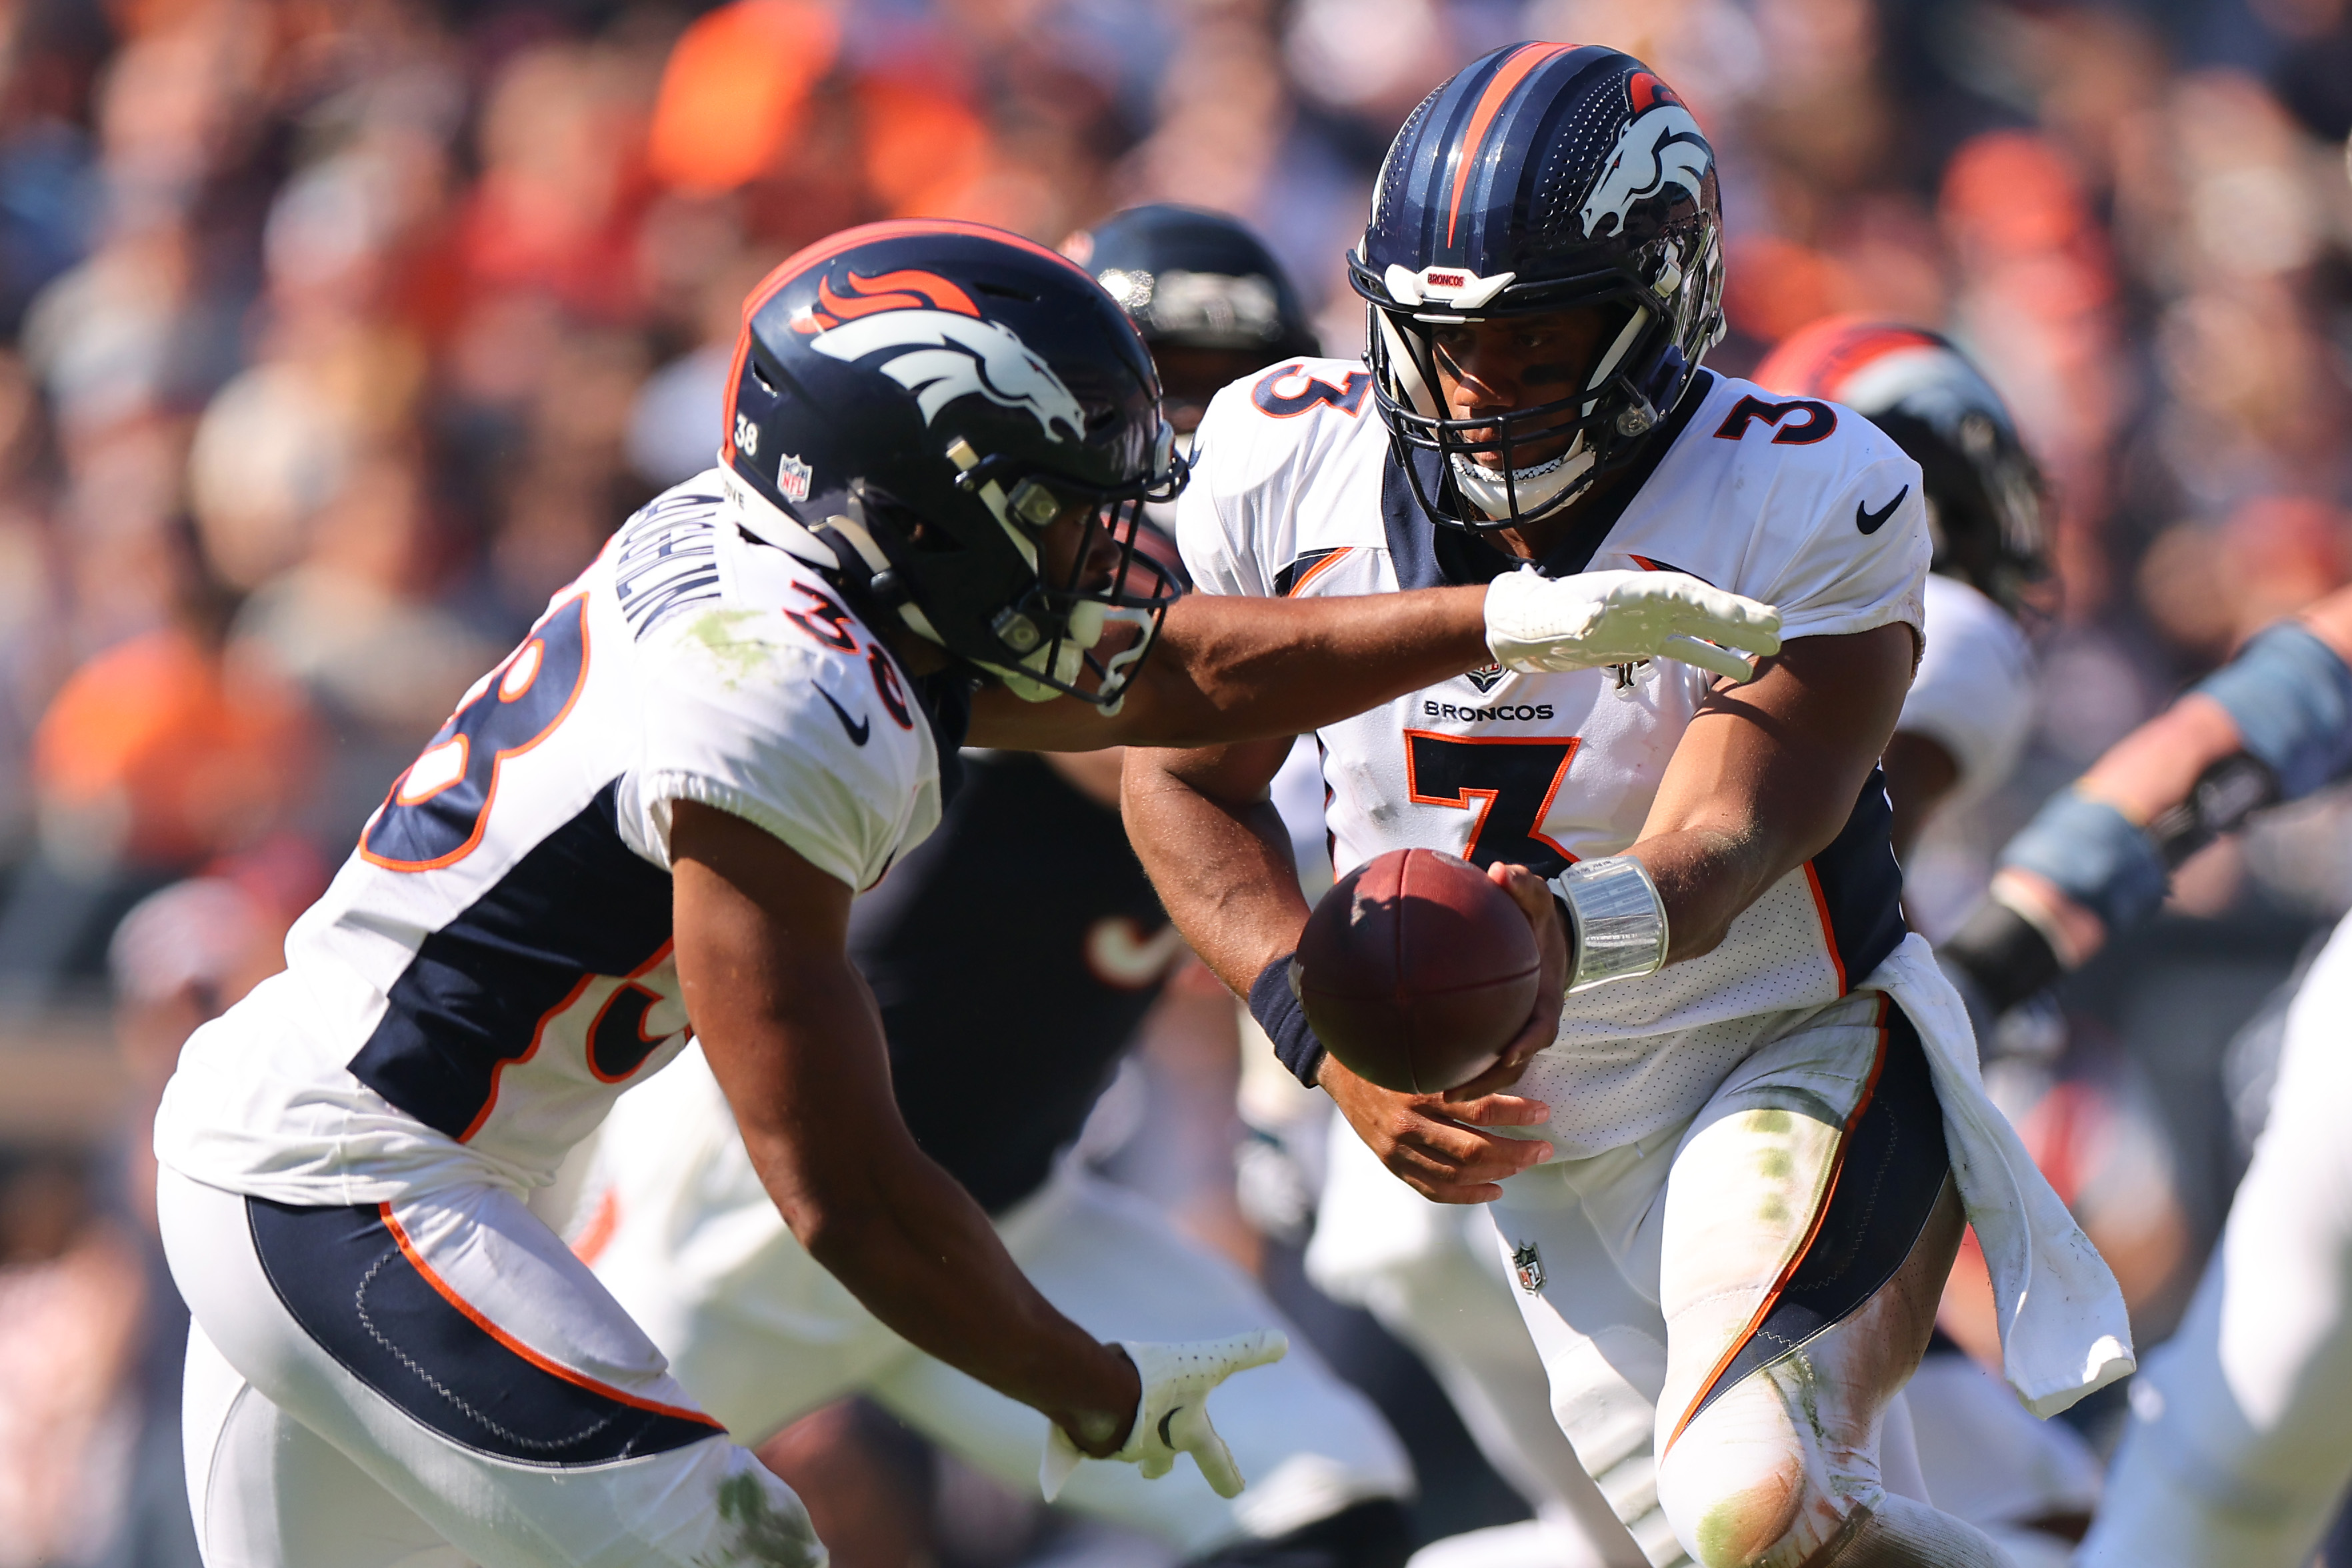 D.J. Moore vs. the Broncos' Defense: Week 4 Matchup and Preview